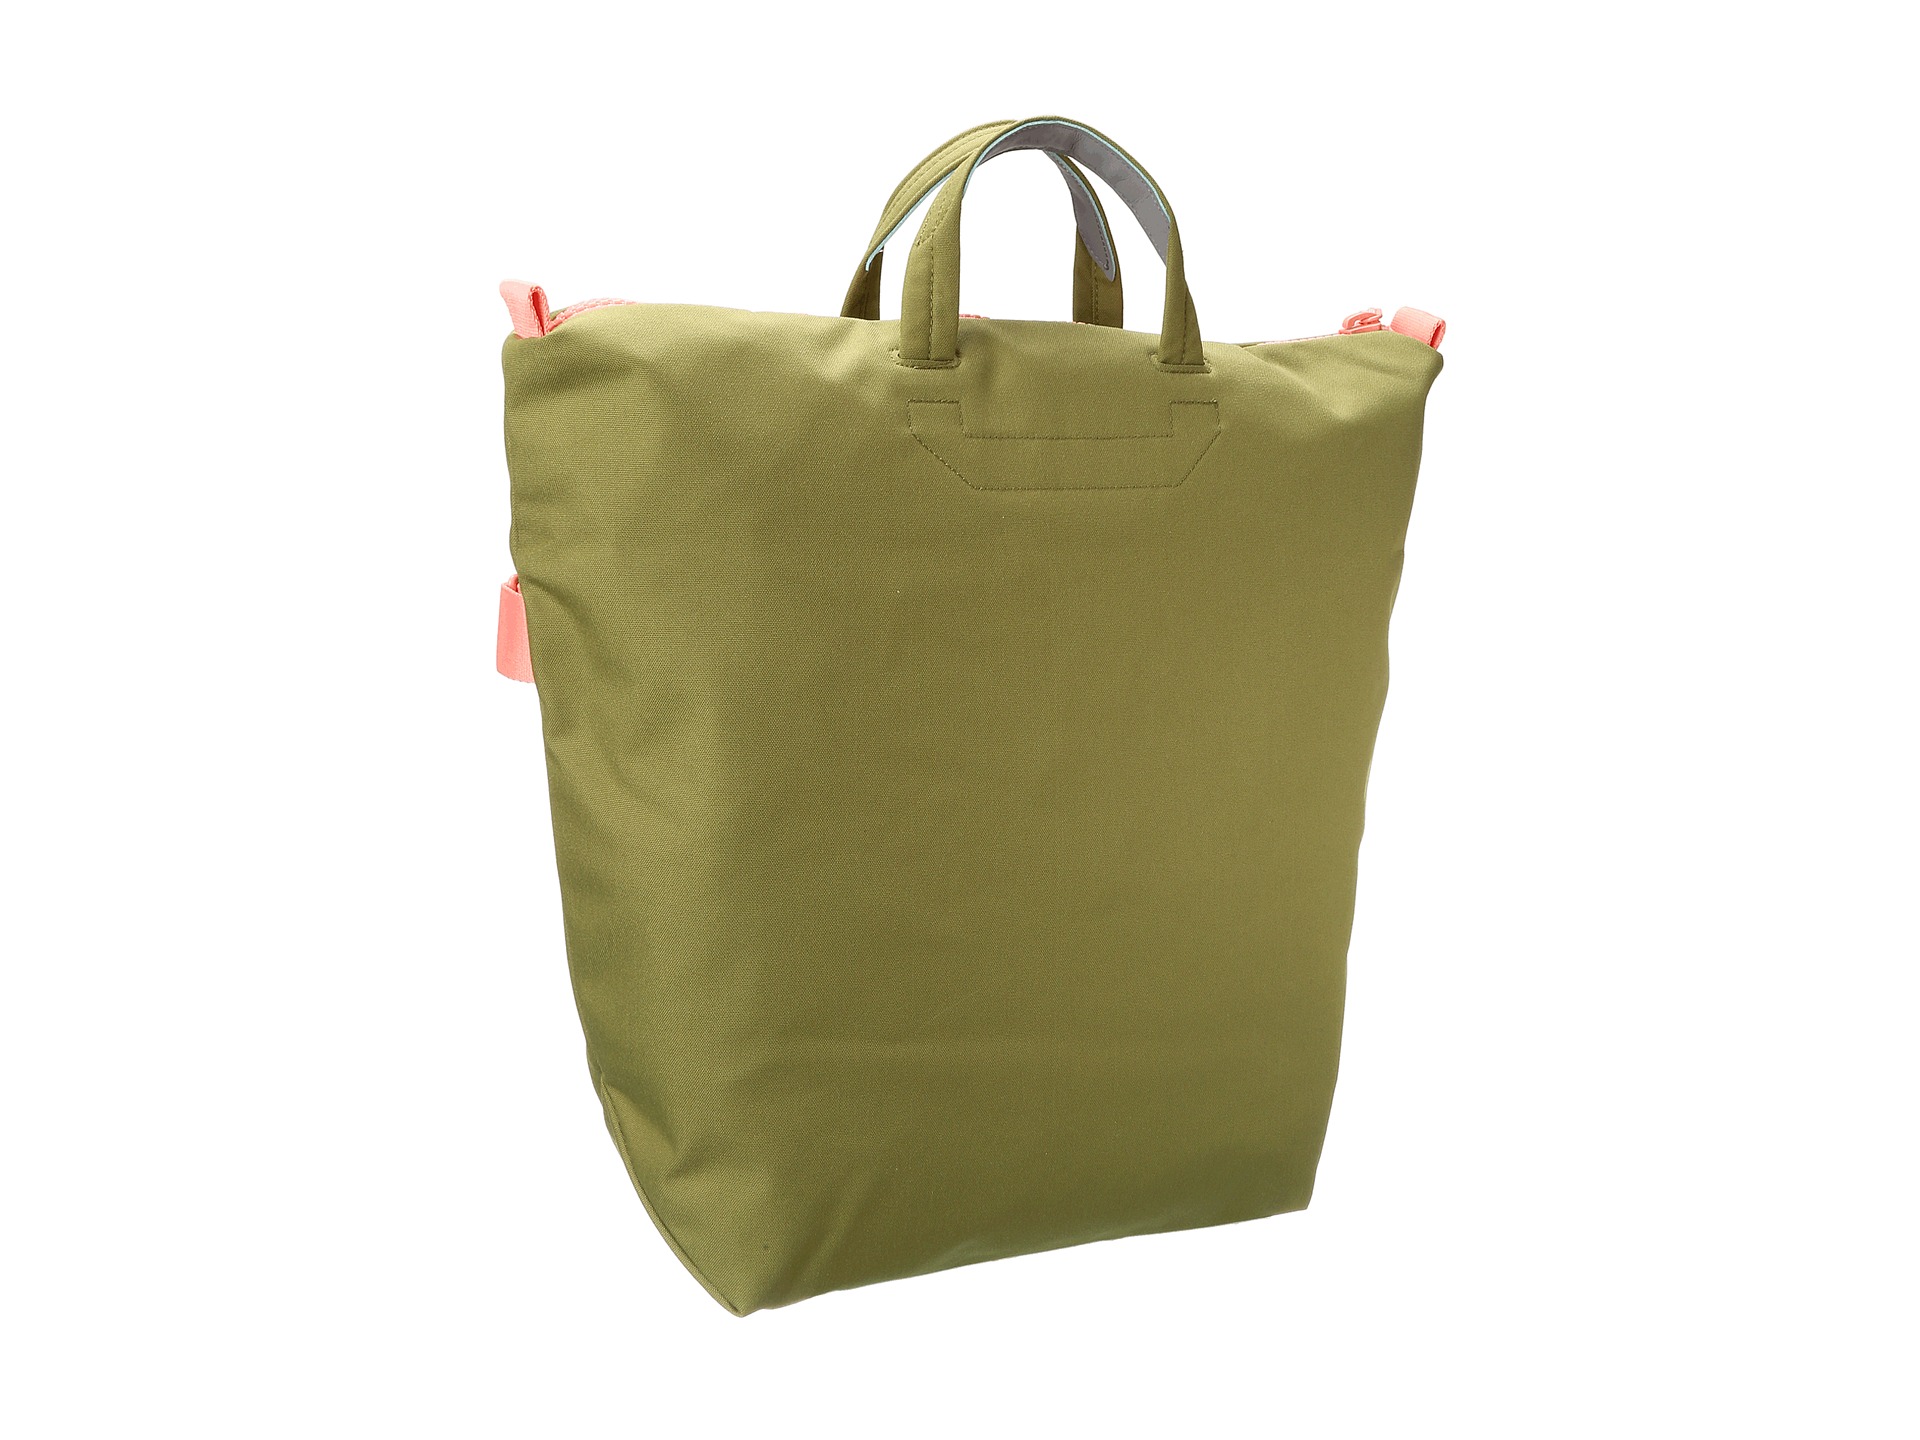 Crumpler The Wren Tote Large | Shipped Free at Zappos